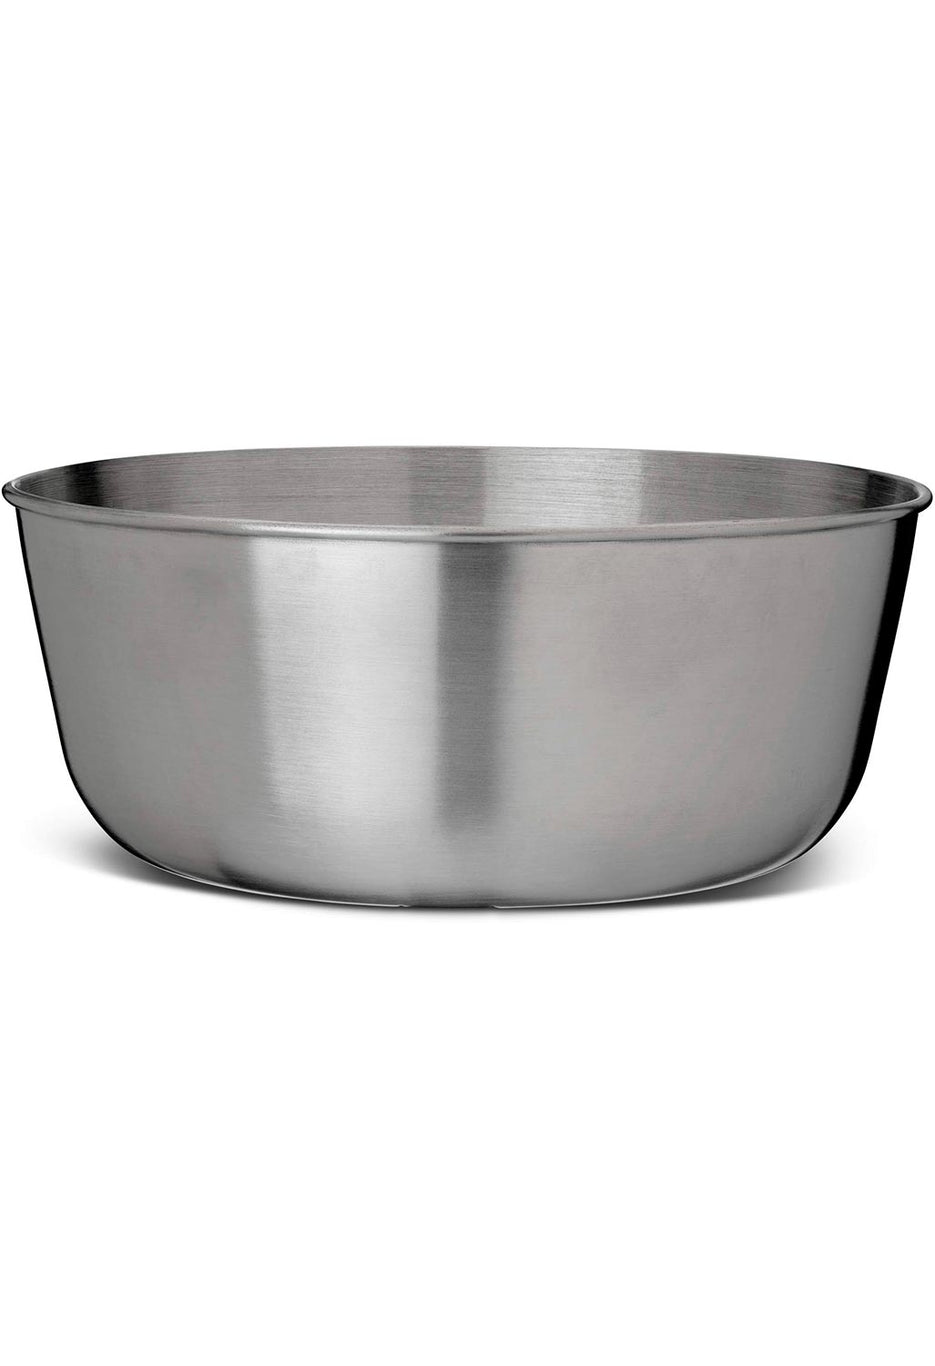 Primus CampFire Stainless Steel Bowl 0